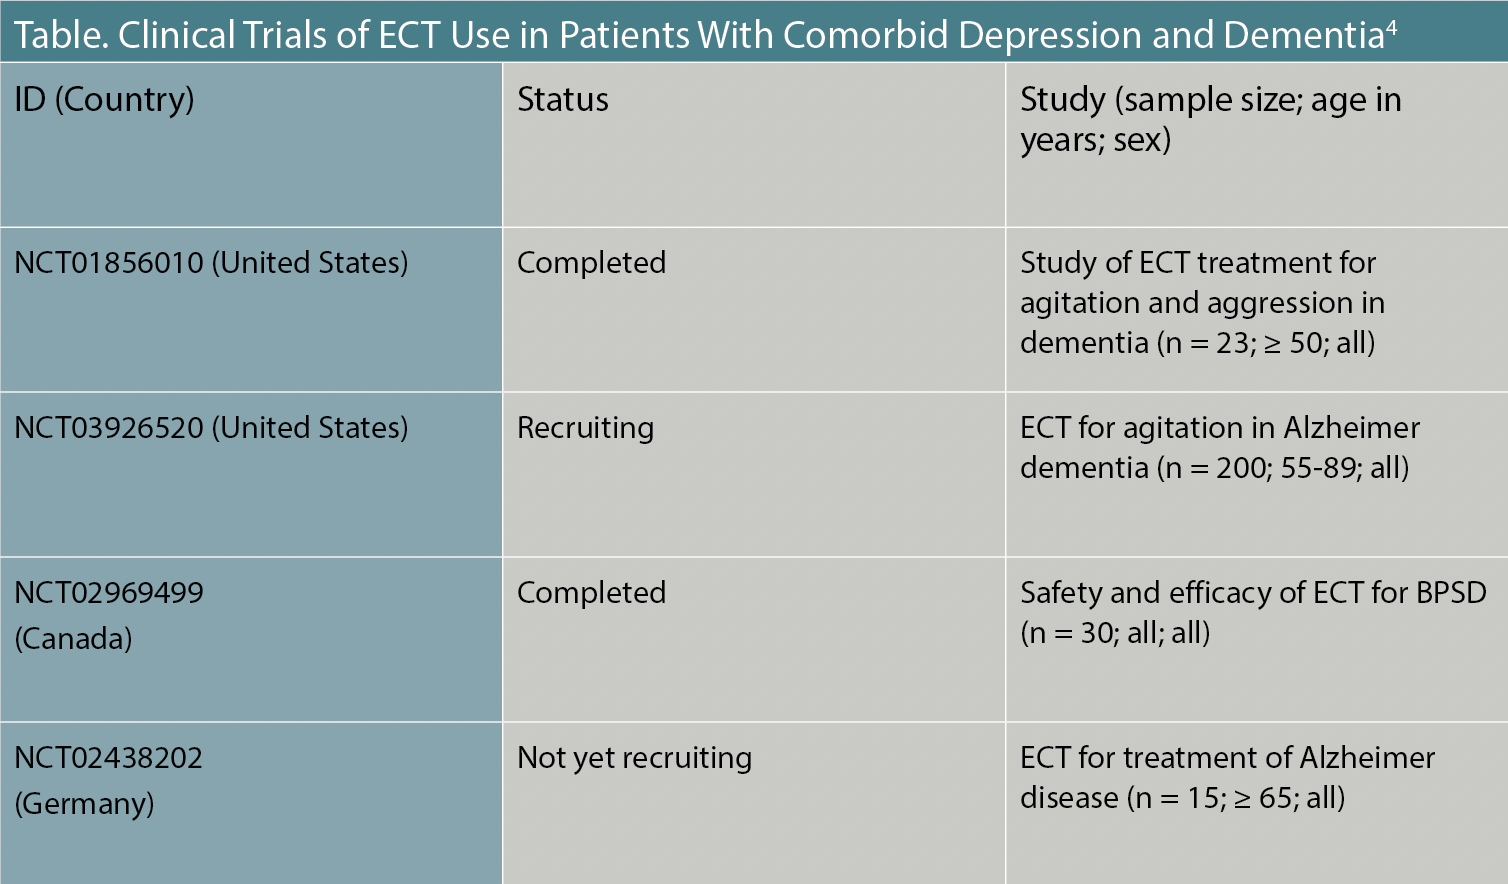 Table. Clinical Trials of ECT Use in Patients With Comorbid Depression and Dementia